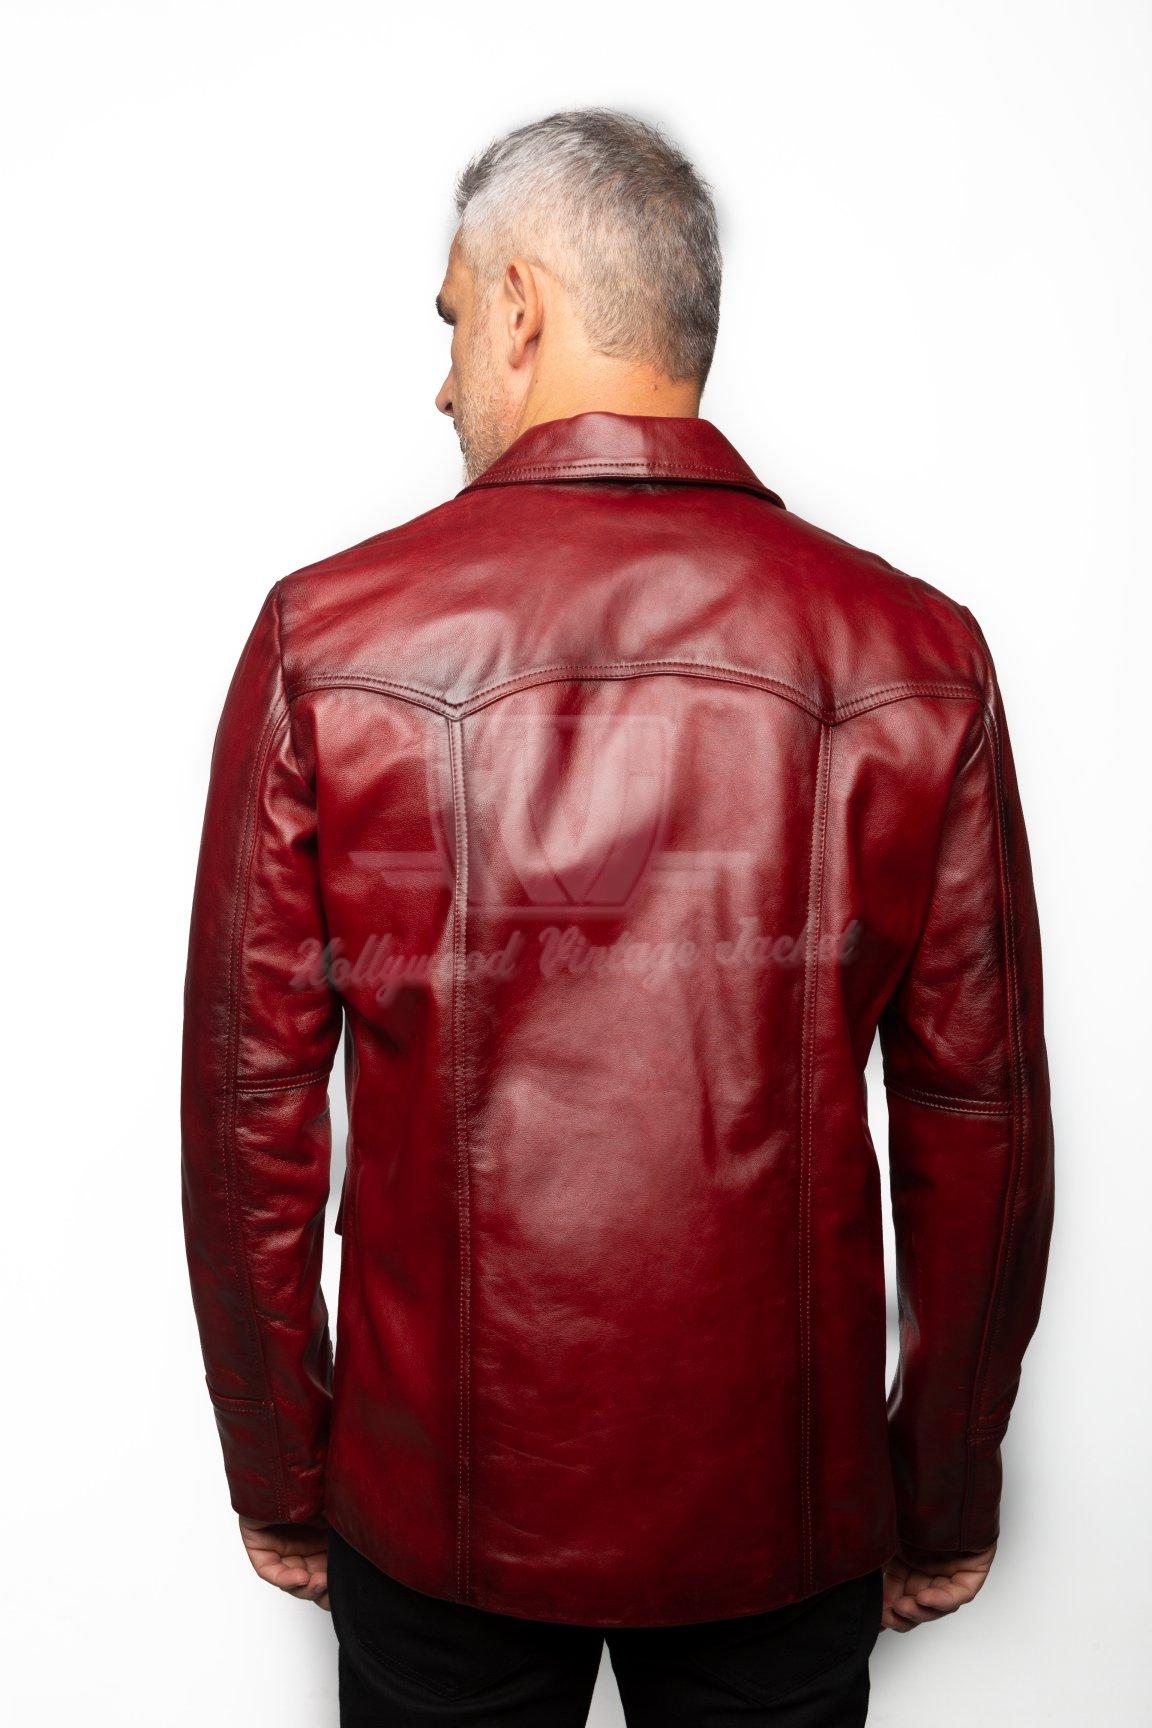 Fight Club inspired  giacca in pelle Rossa - Hollywood Vintage Jacket